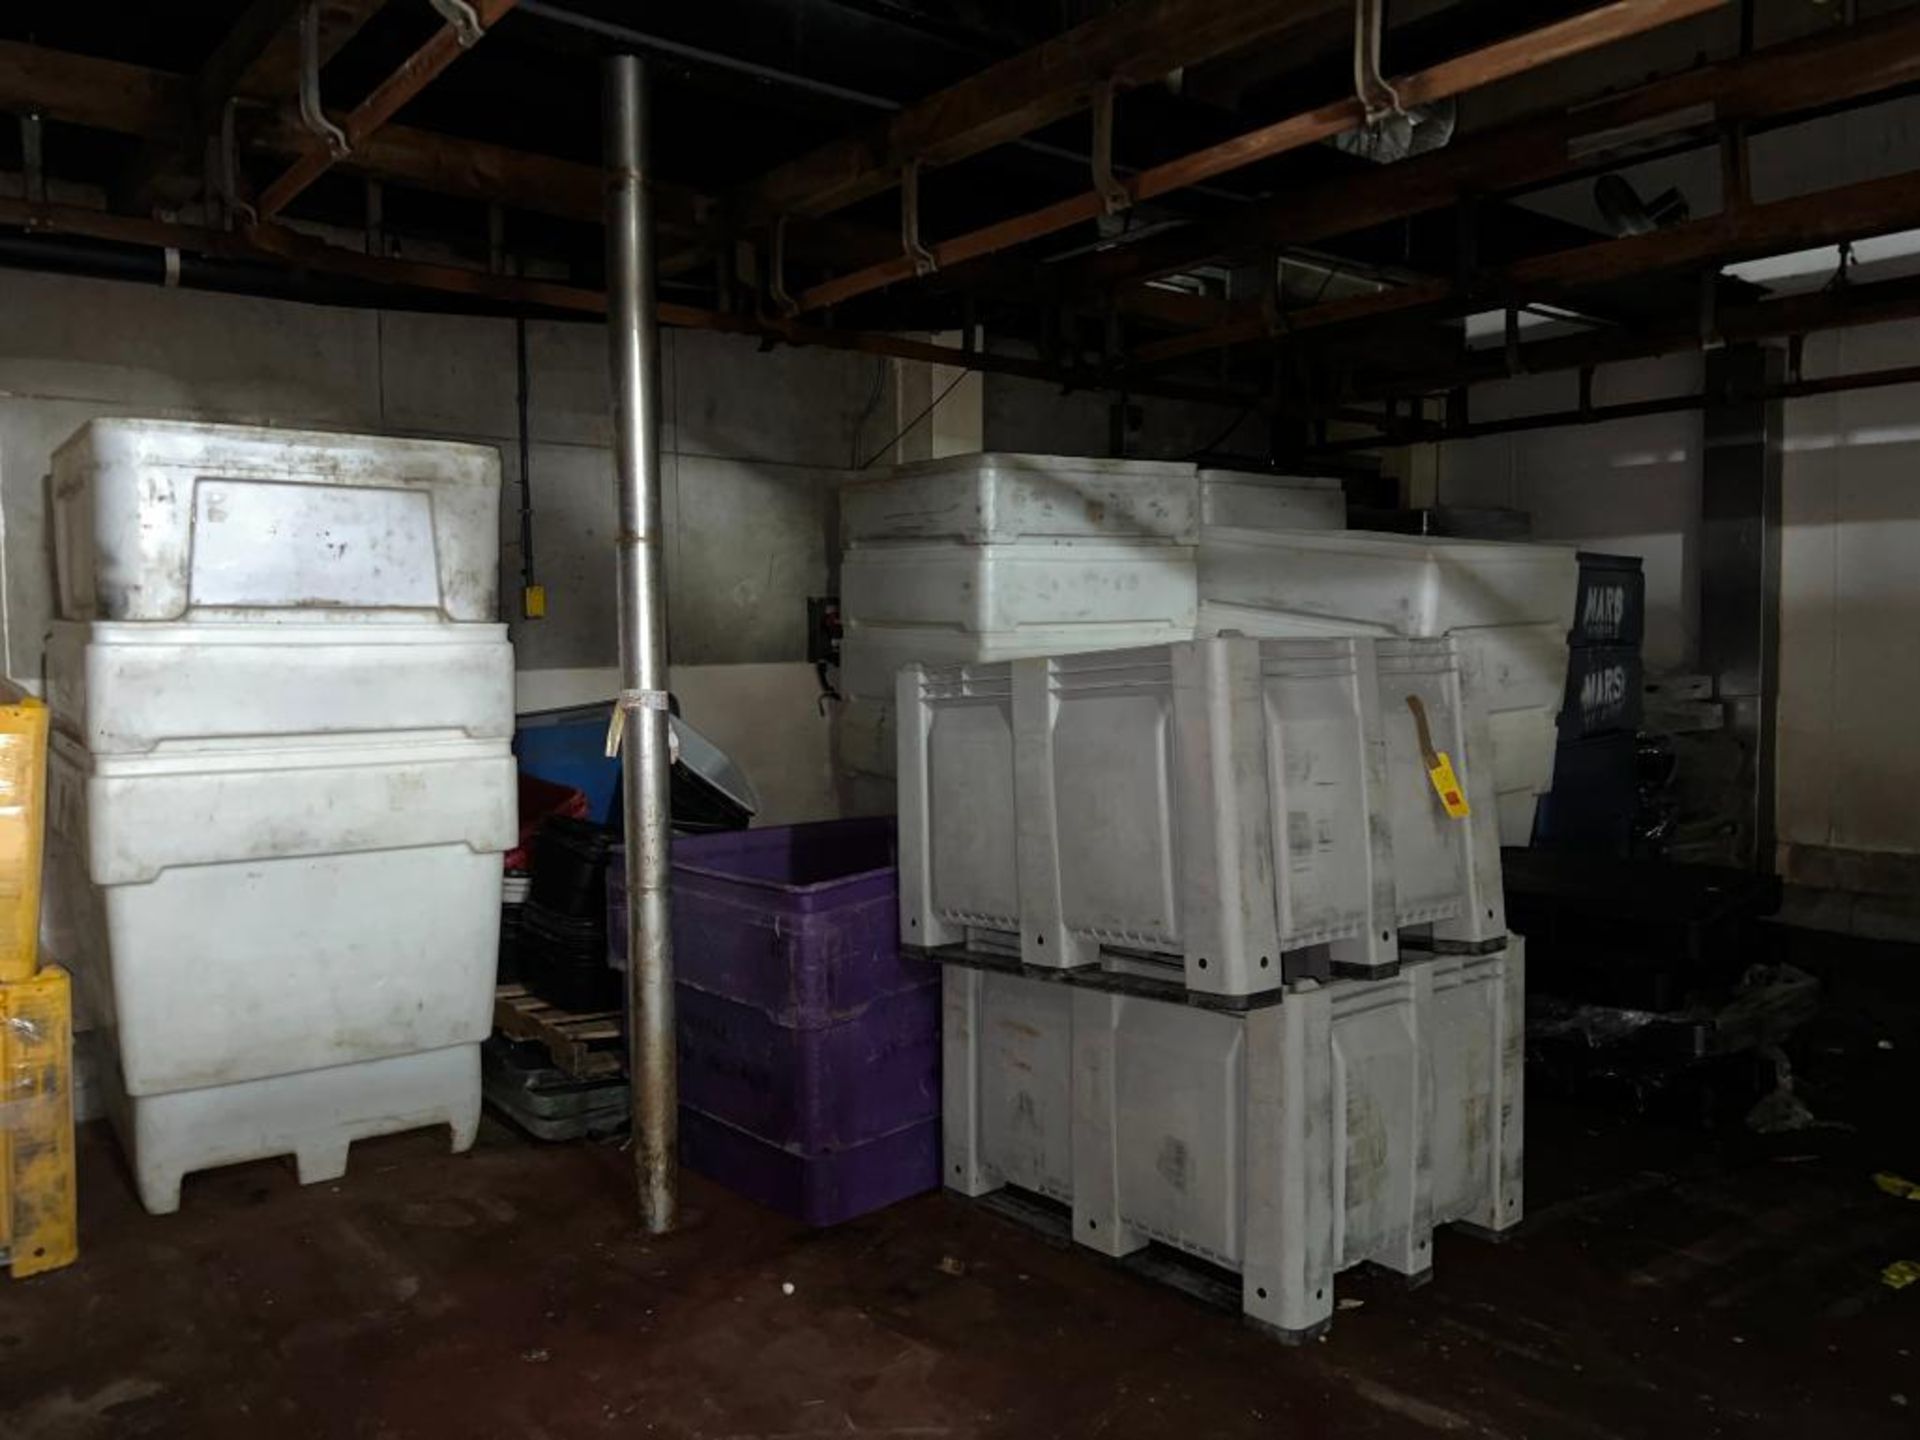 100+ Plastic Totes, Pallets and Box - Rigging Fee: $200 - Image 2 of 2